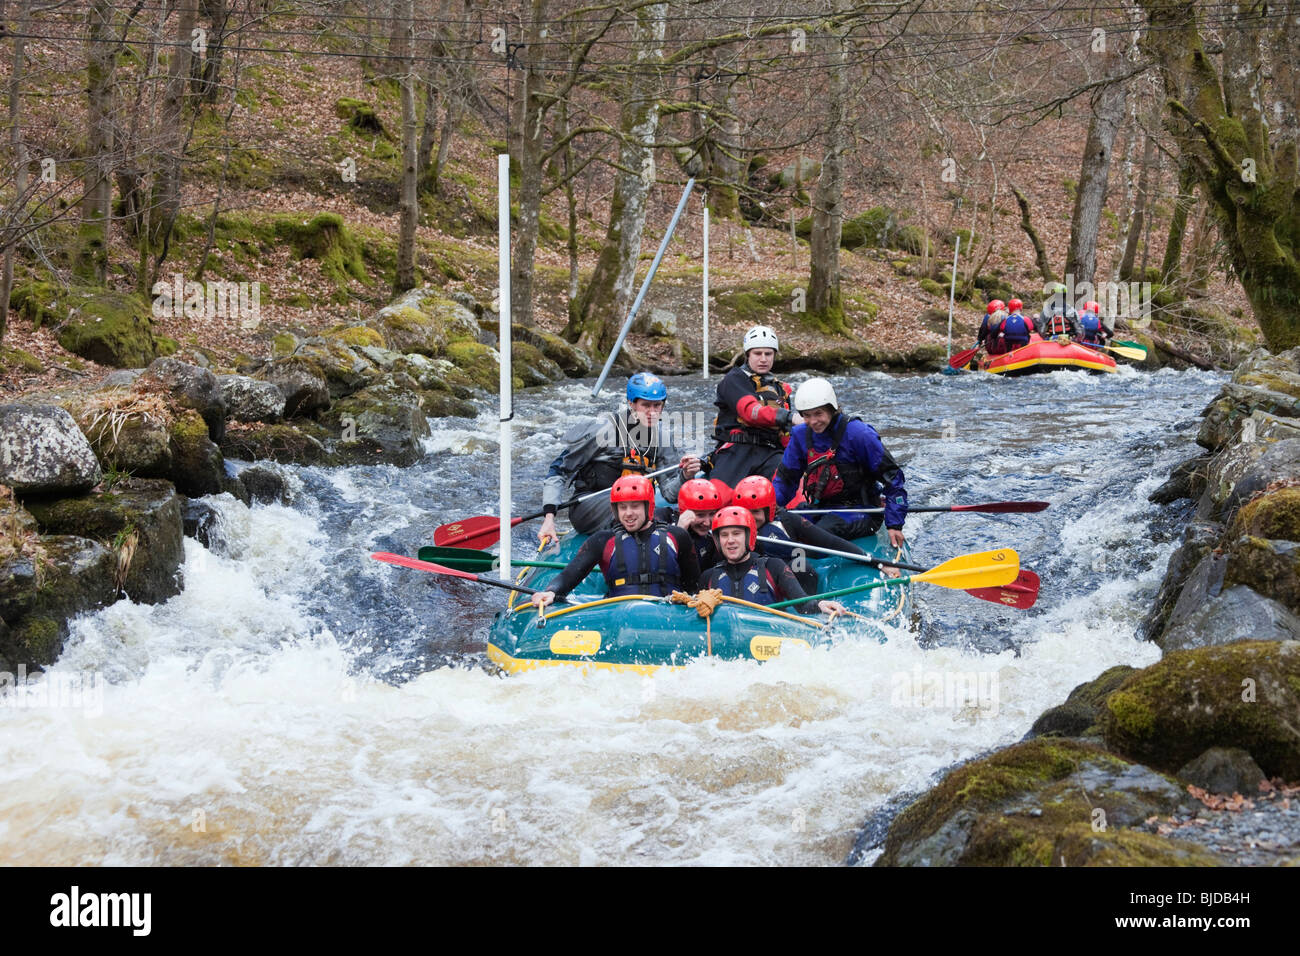 People having fun white water rafting on Tryweryn River. National Whitewater Centre, Frongoch, Gwynedd, North Wales, UK, Britain Stock Photo